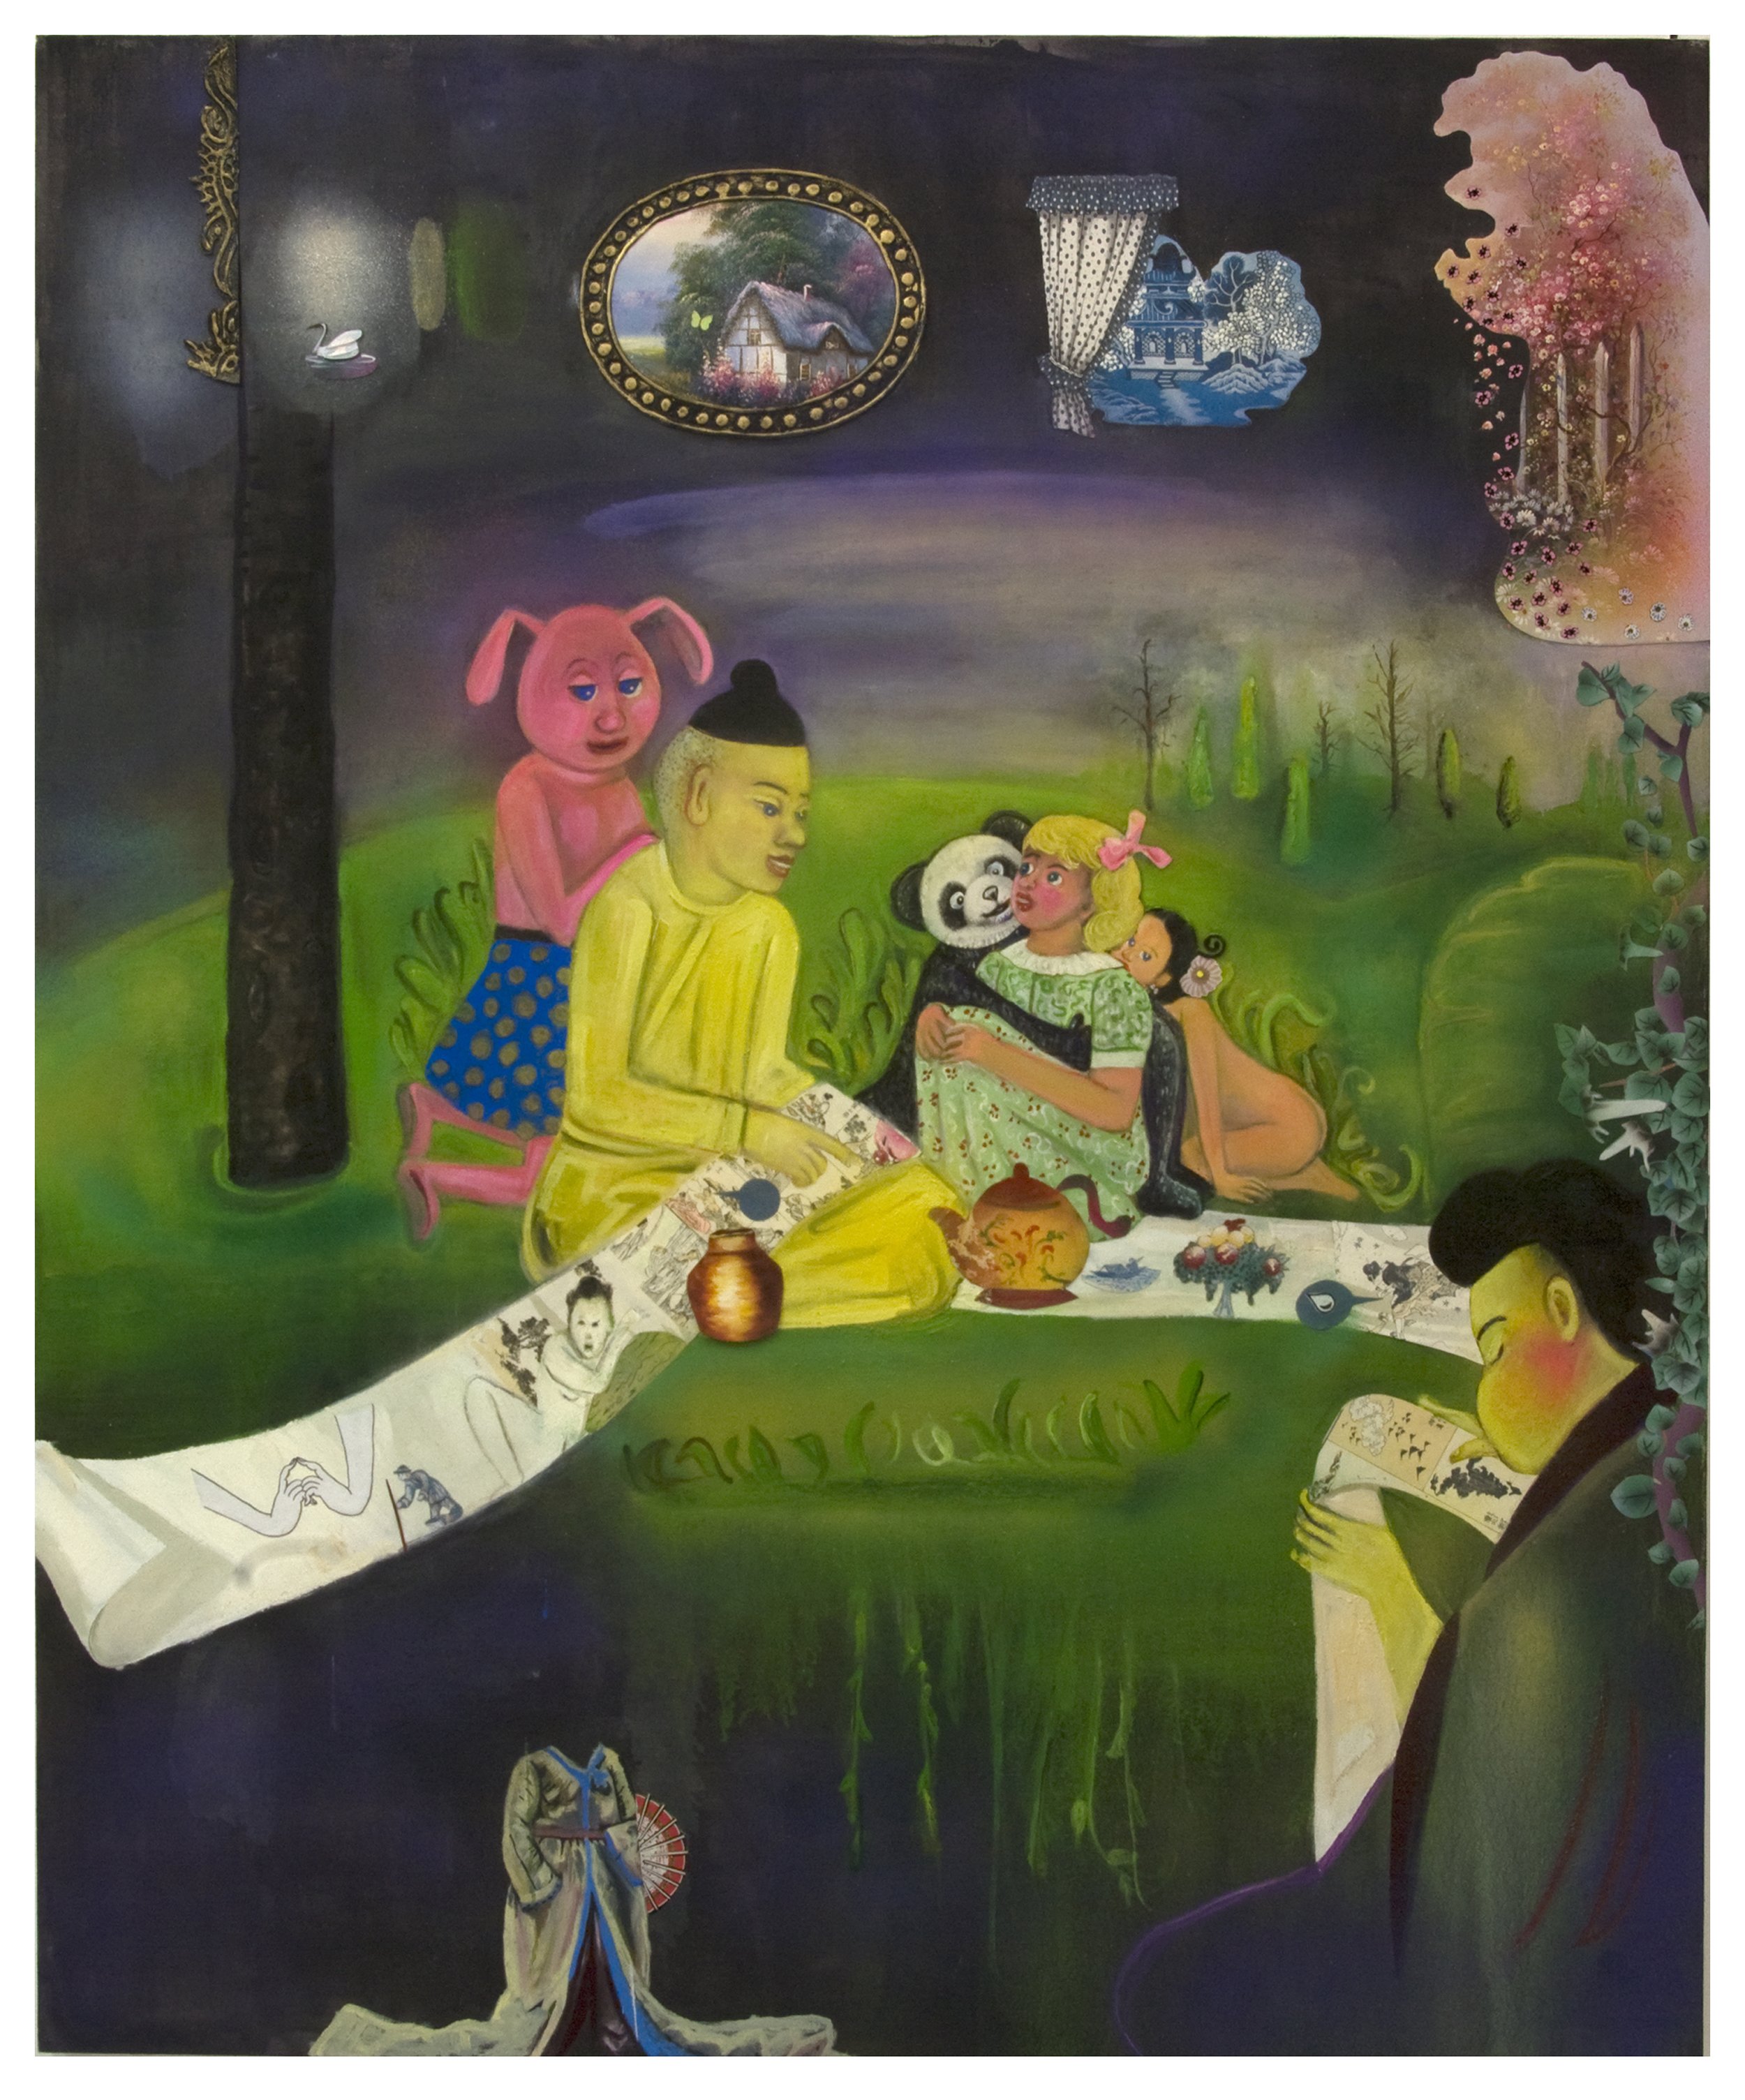 Rules of Conduct vs Sentimental Realities, 66" x 54", mixed media, collage, and oil on canvas, 2011